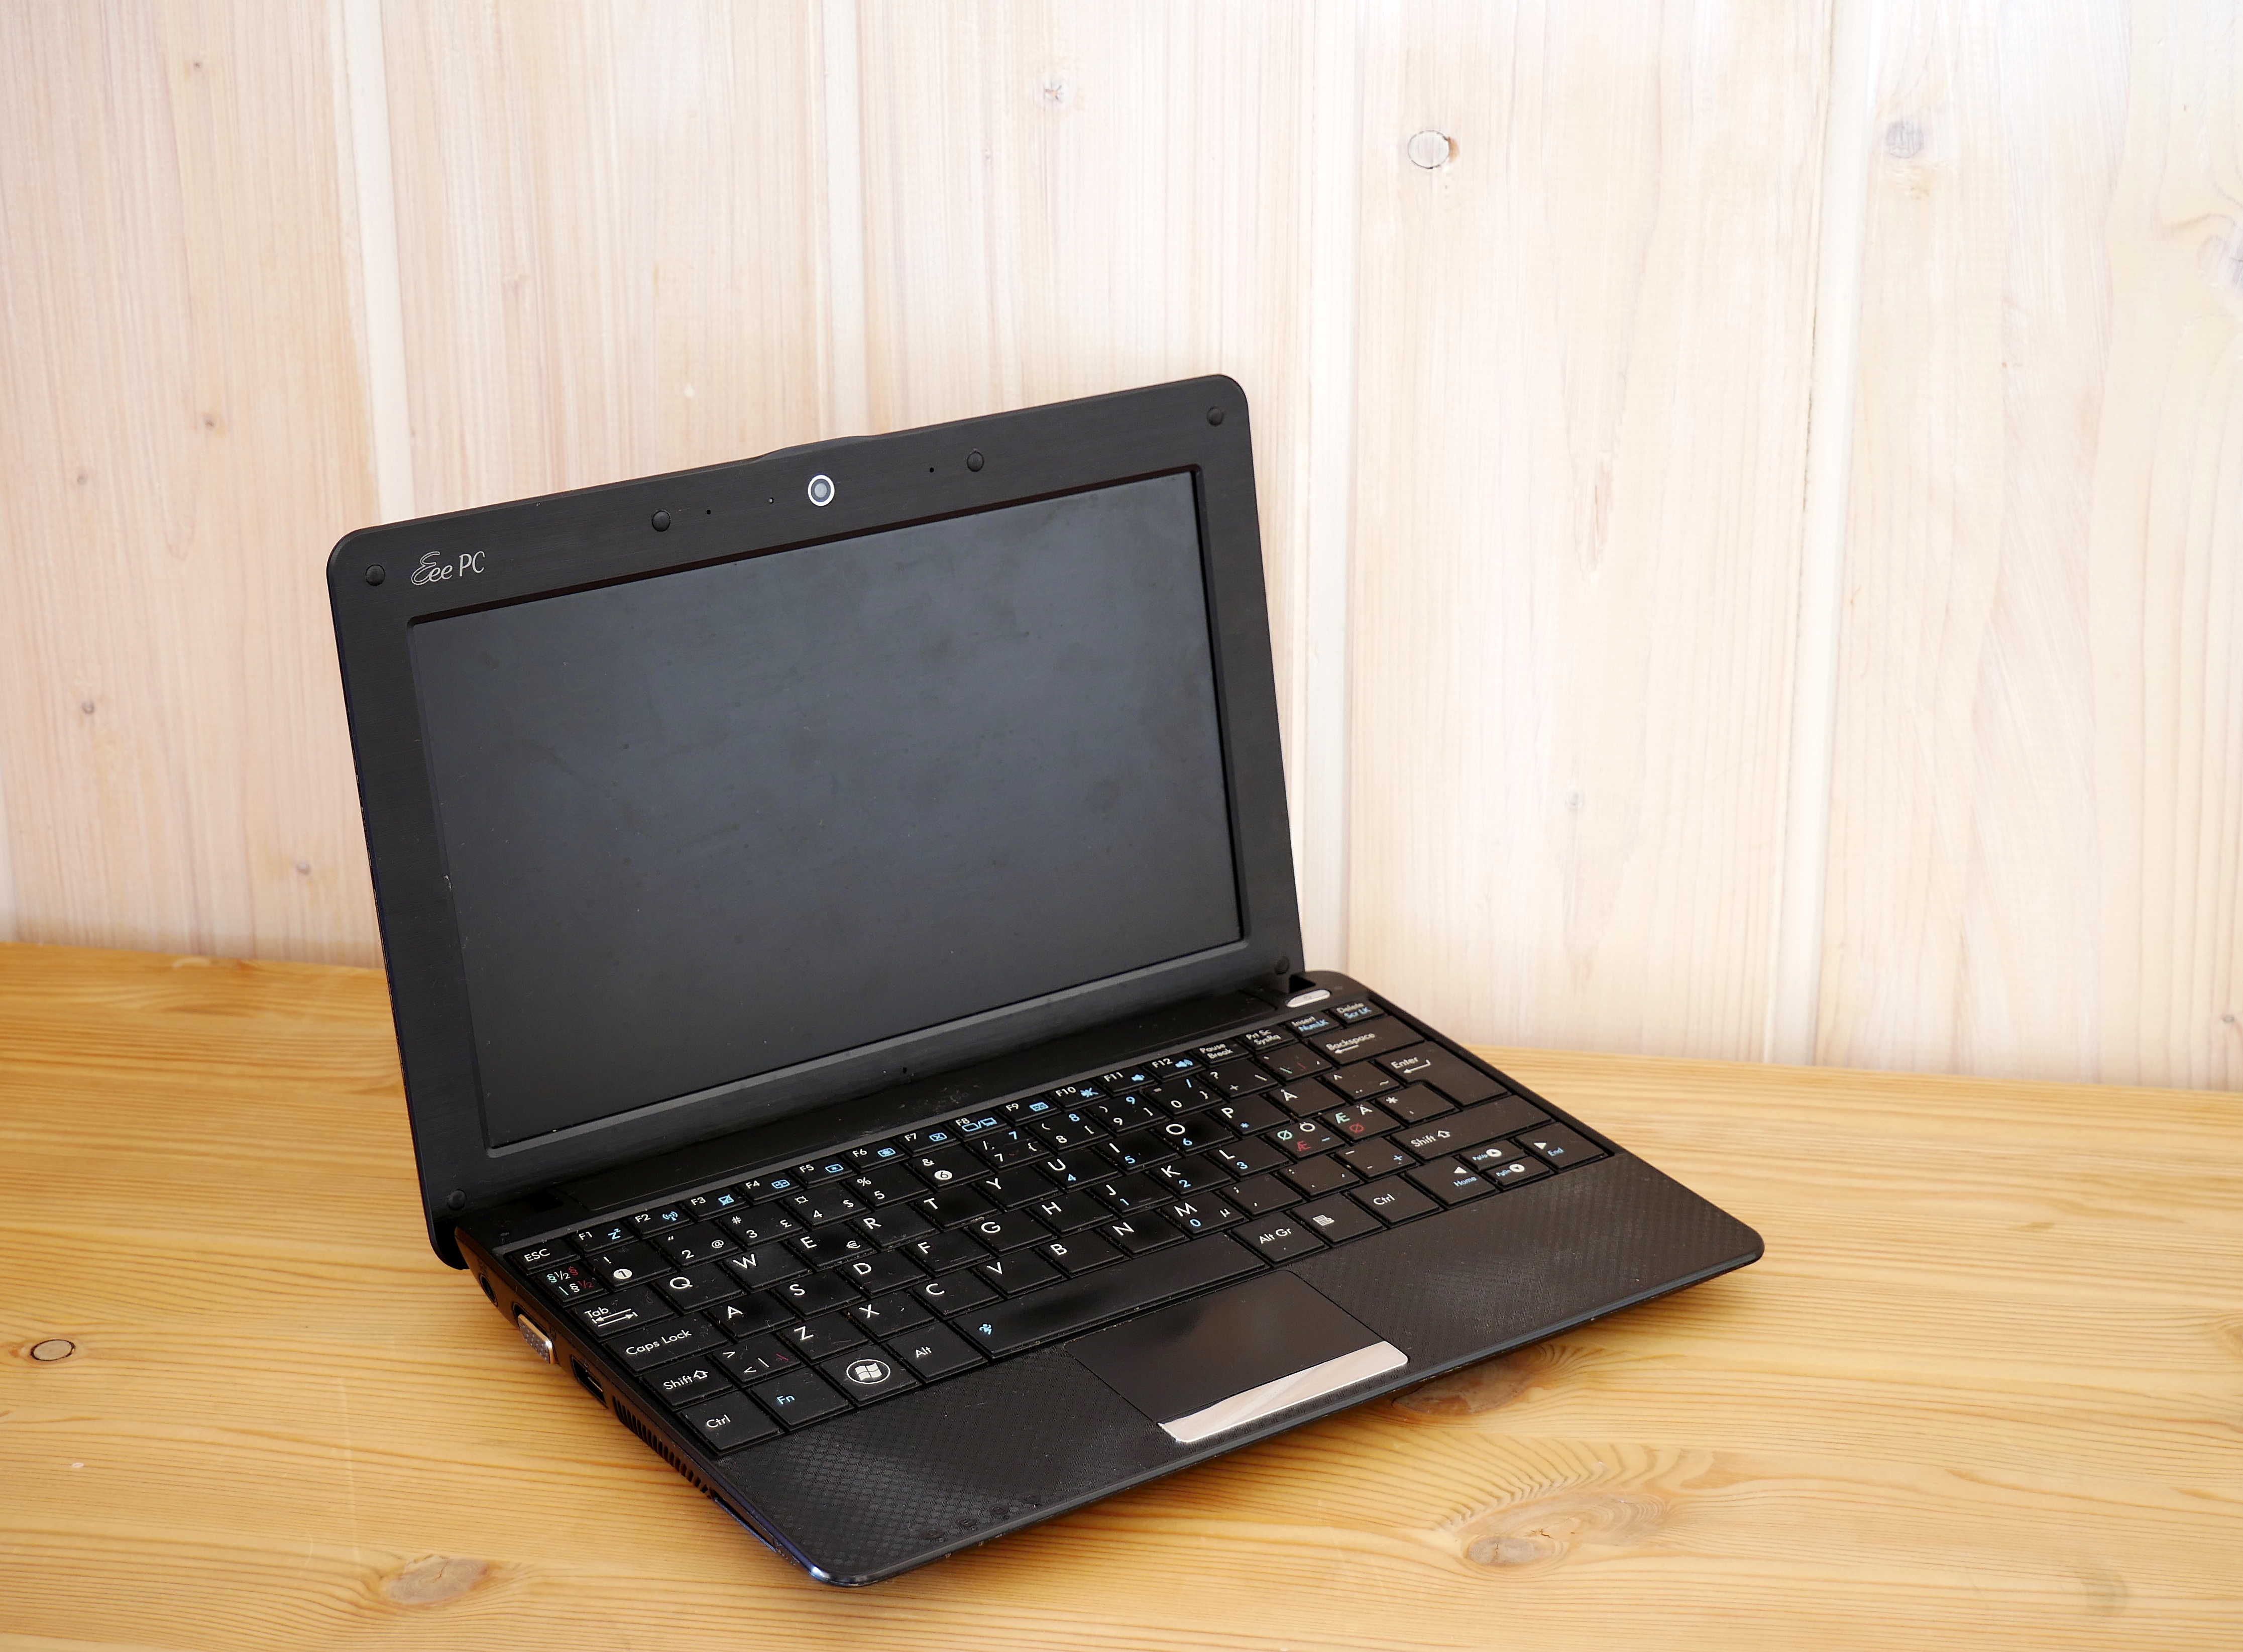 asus eee pc support drivers